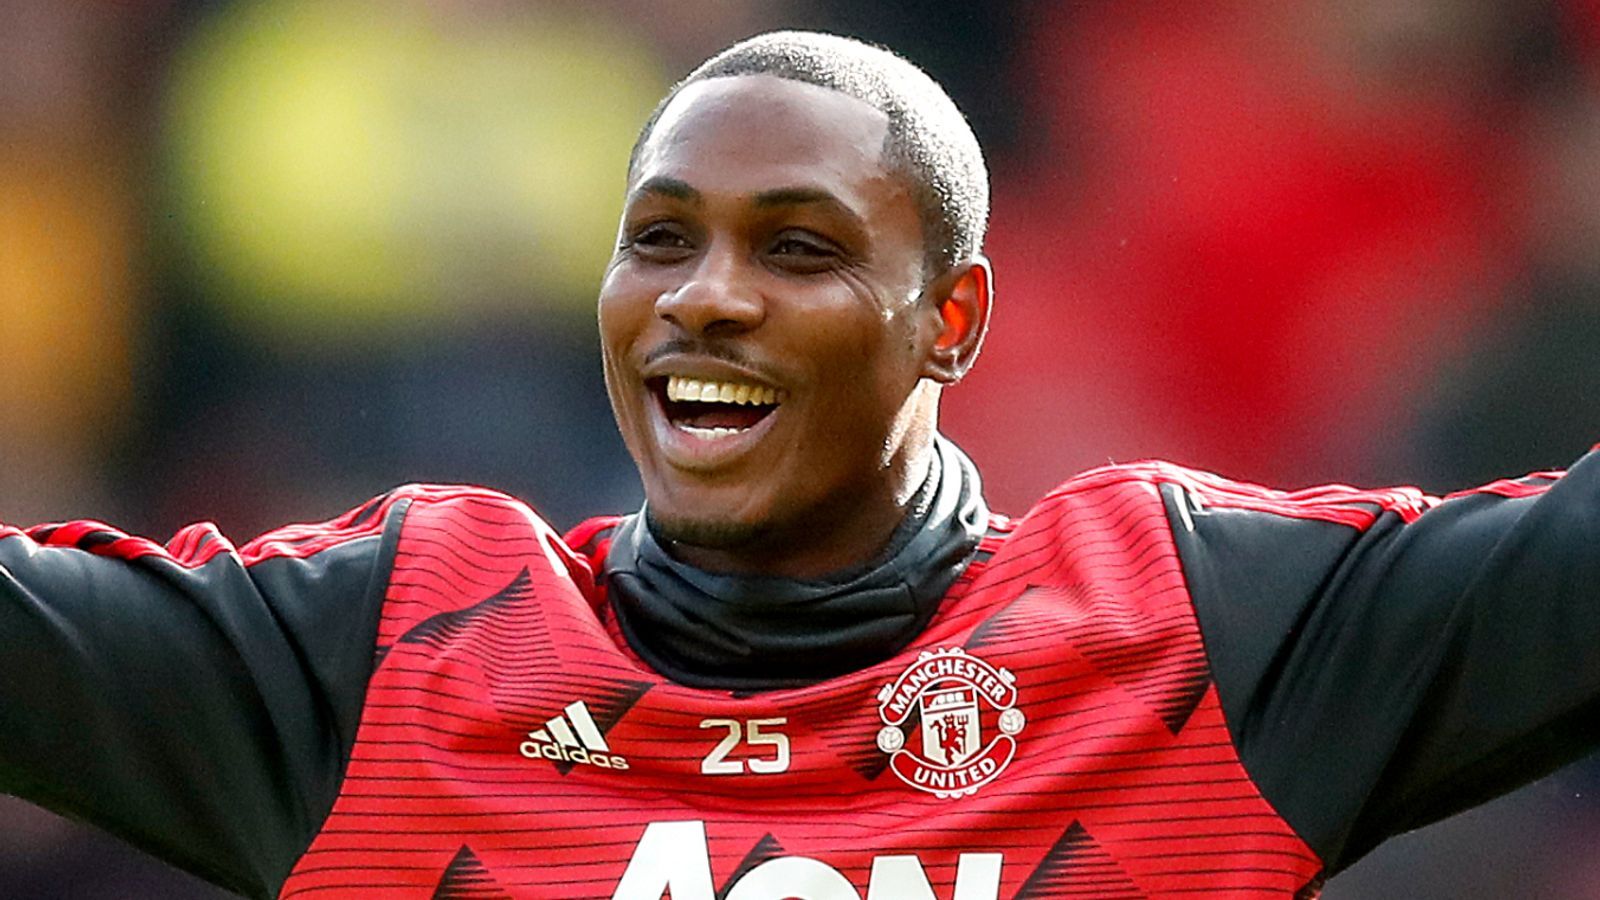 Ighalo Makes Manchester United History by Equalling James Hanson